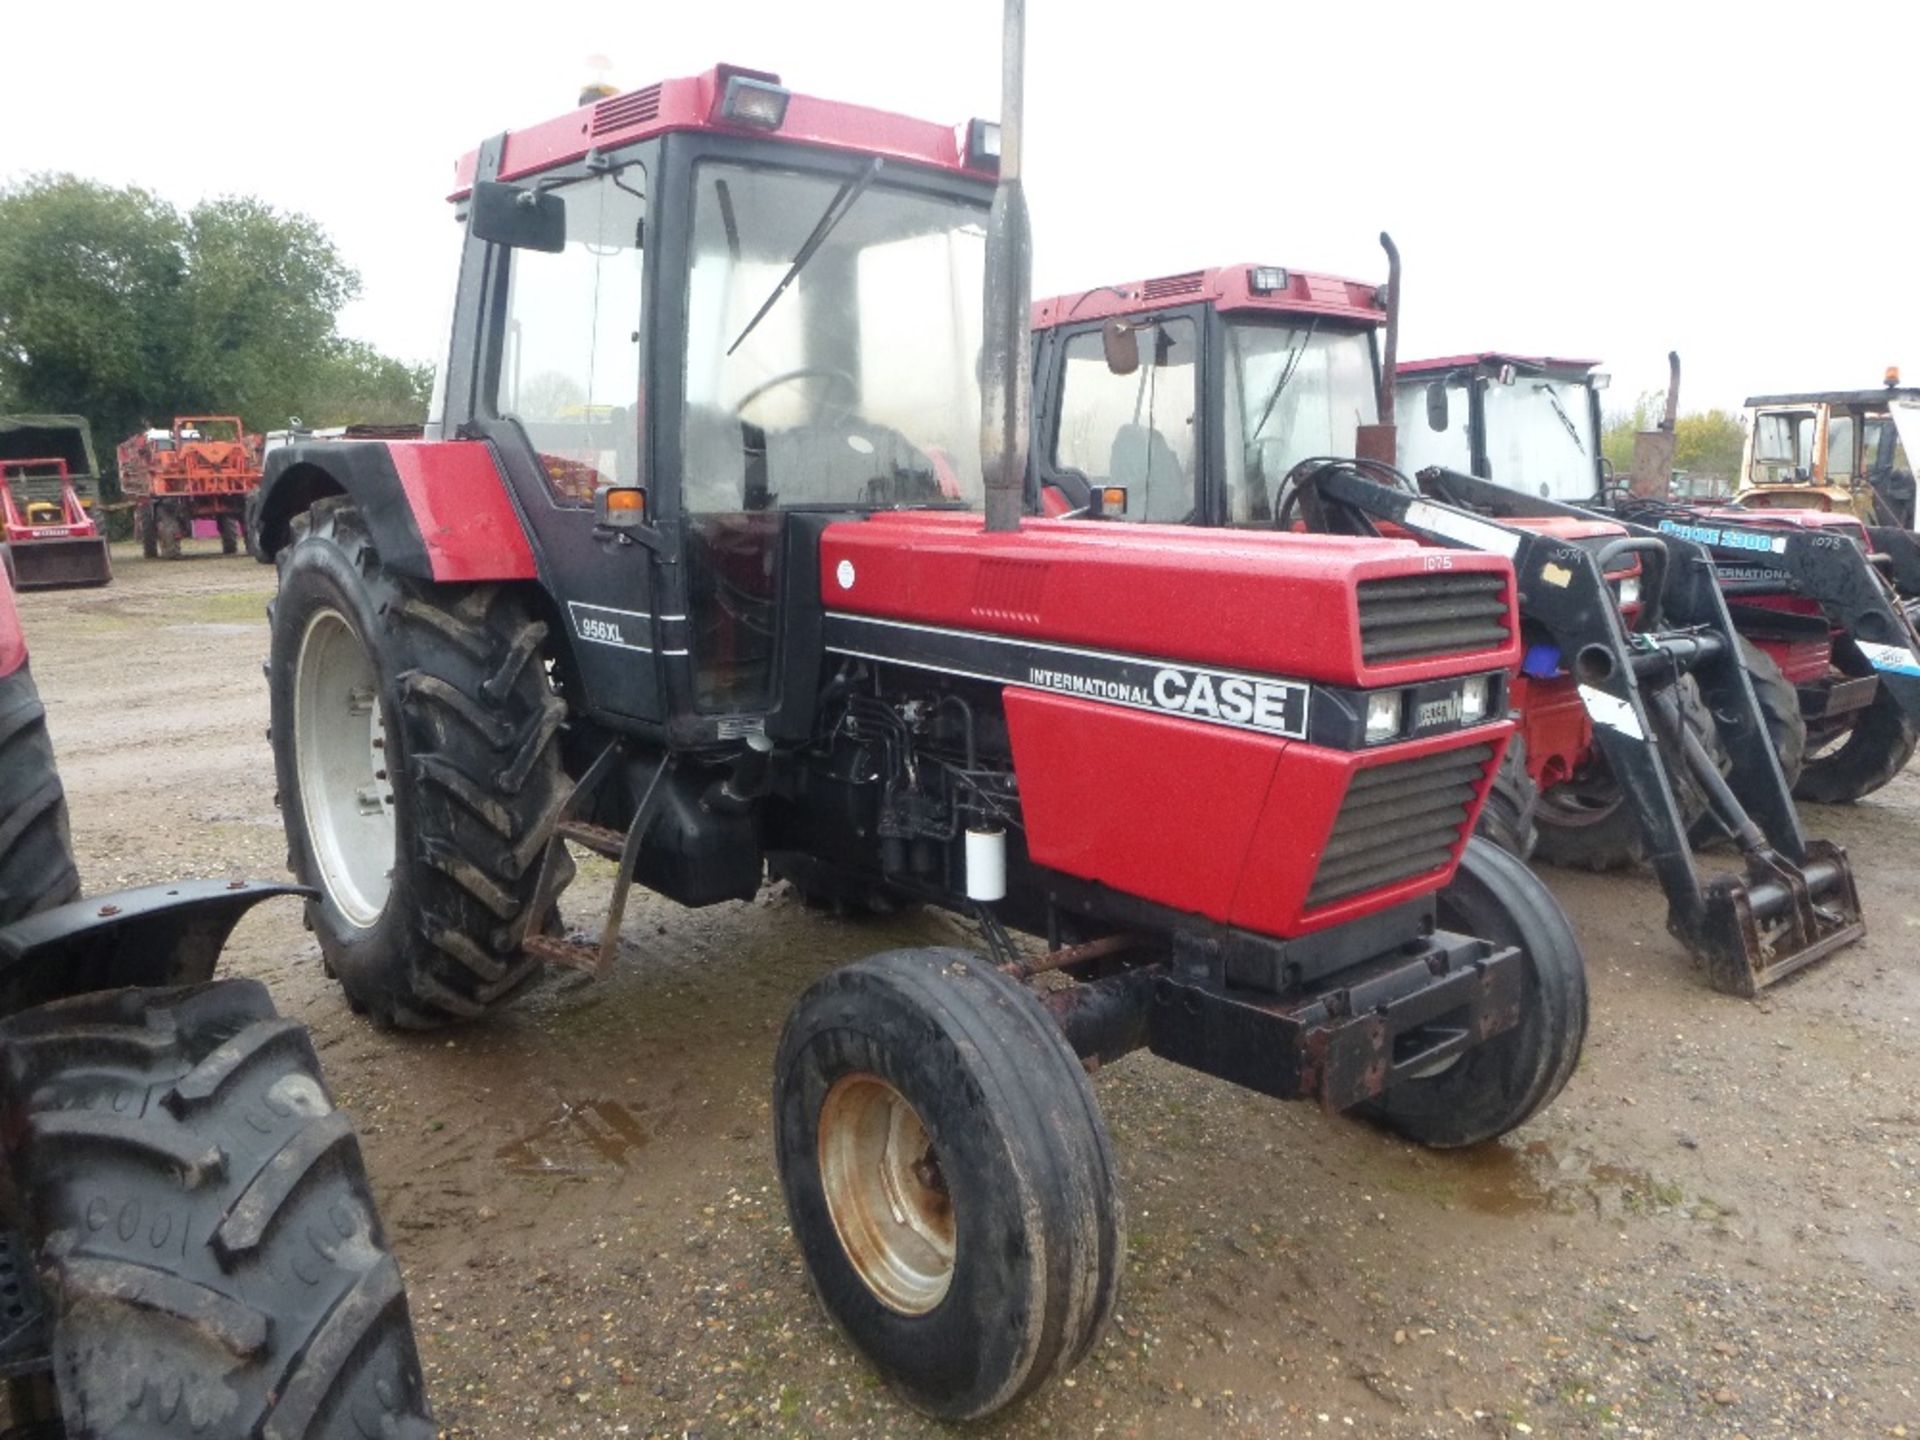 1990 Case International 956 XL 2wd Tractor - Image 3 of 12